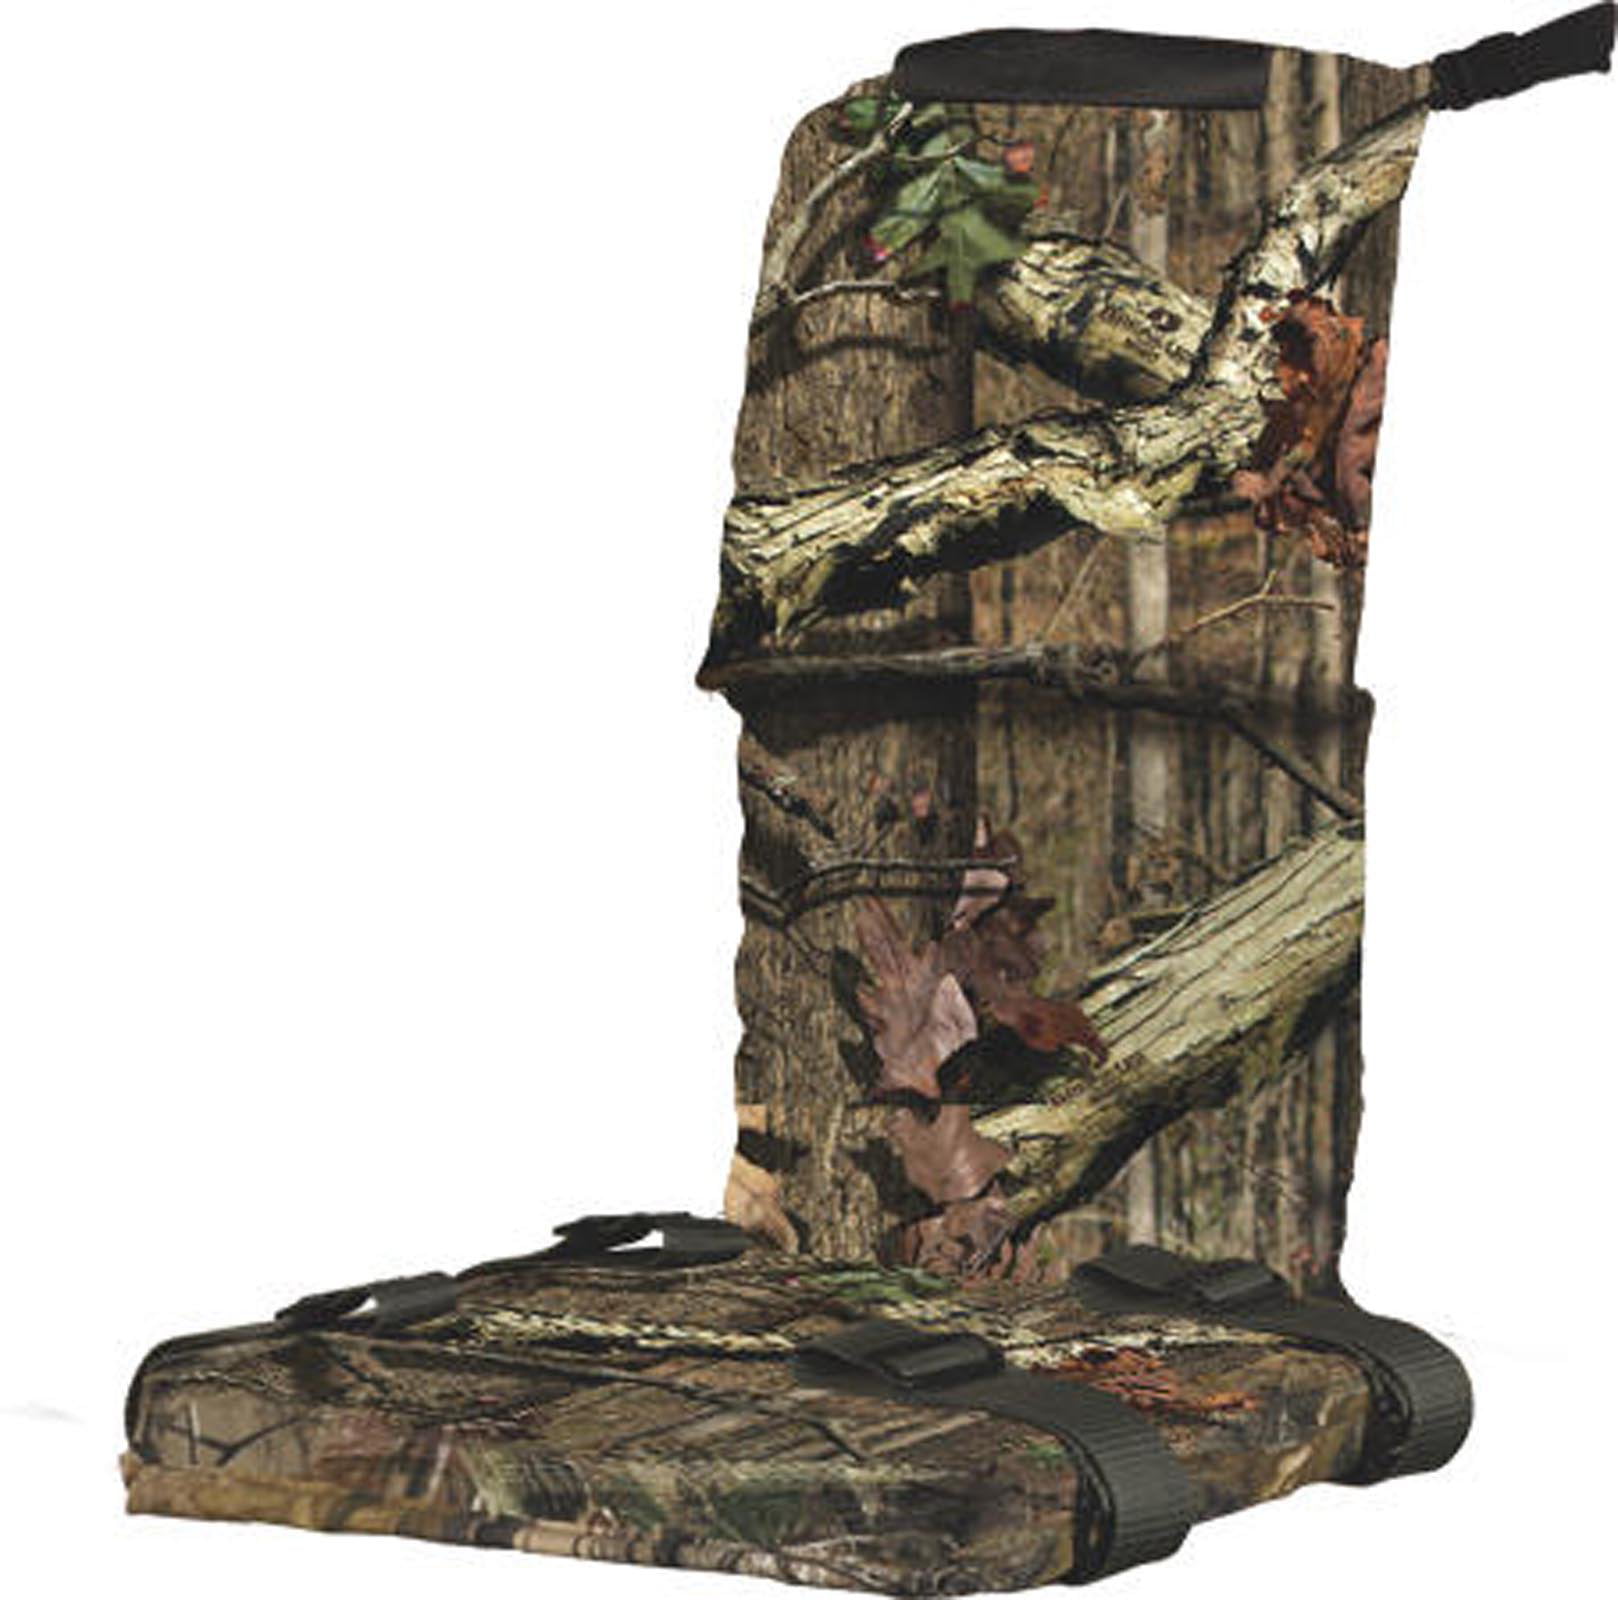 2 Pack for sale online Summit 85250 Tree Seat 